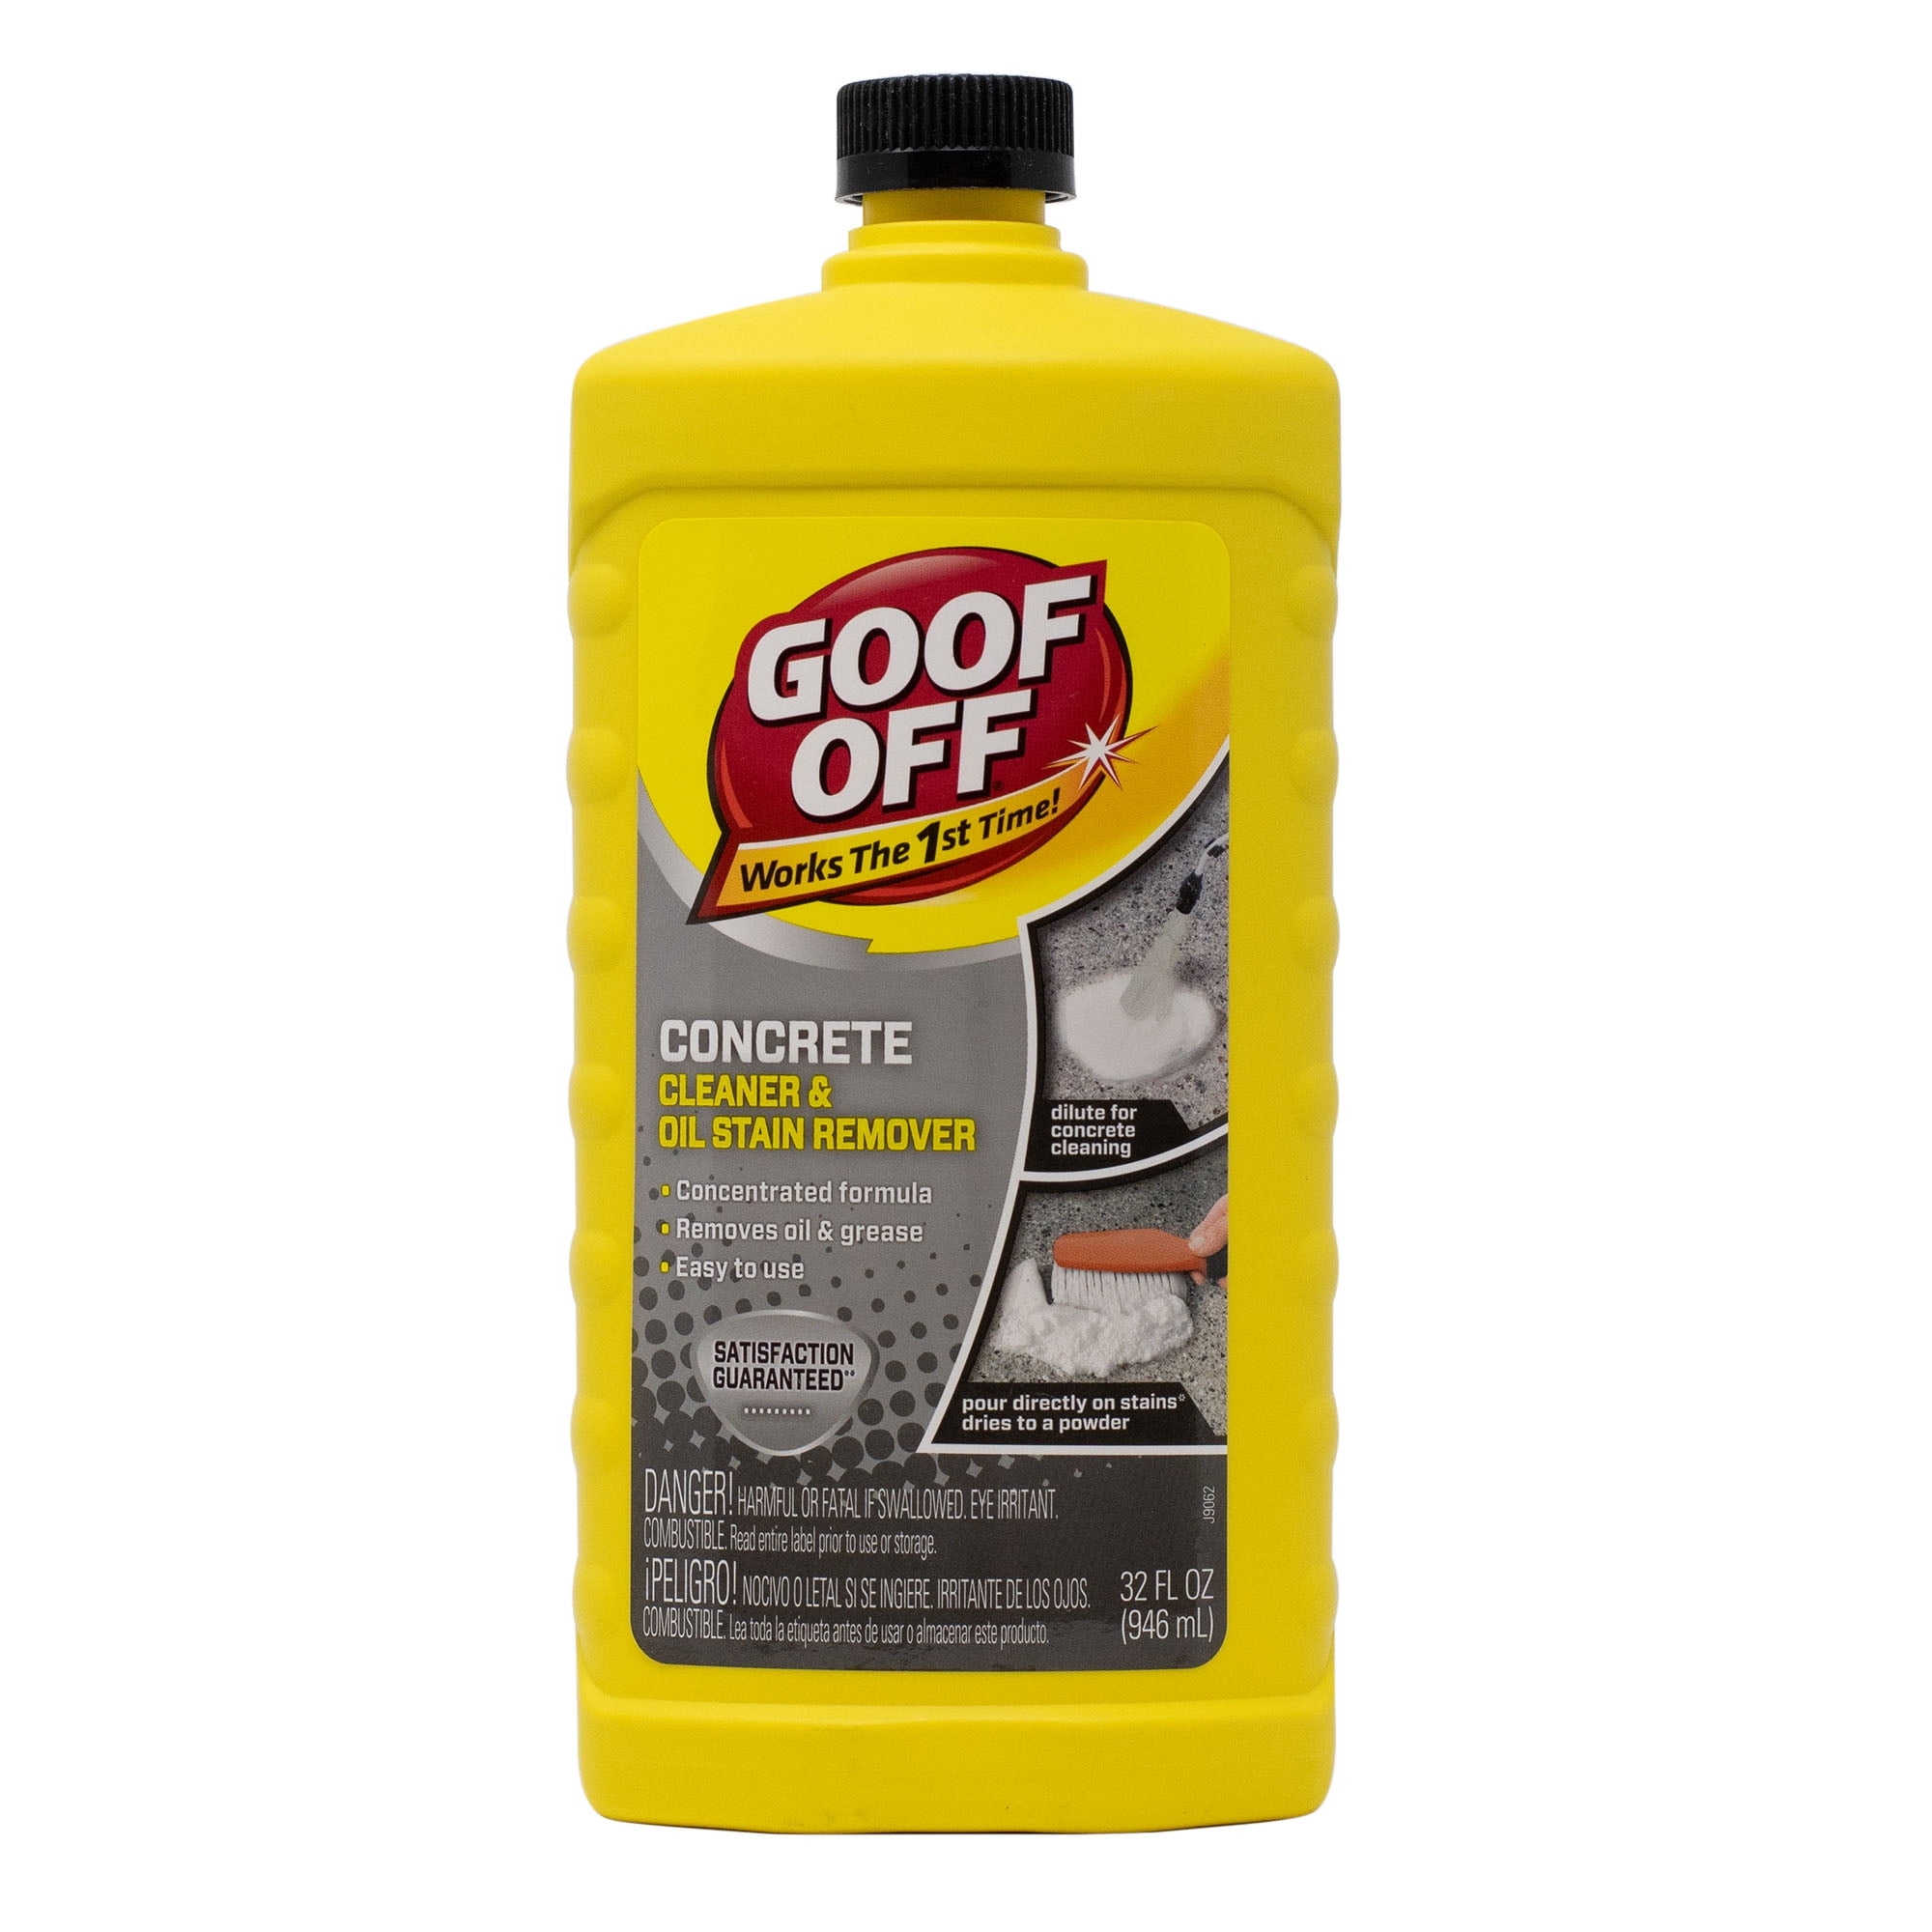 Goof Off Concrete Cleaner and Oil Stain Remover - 26 oz. Bottle